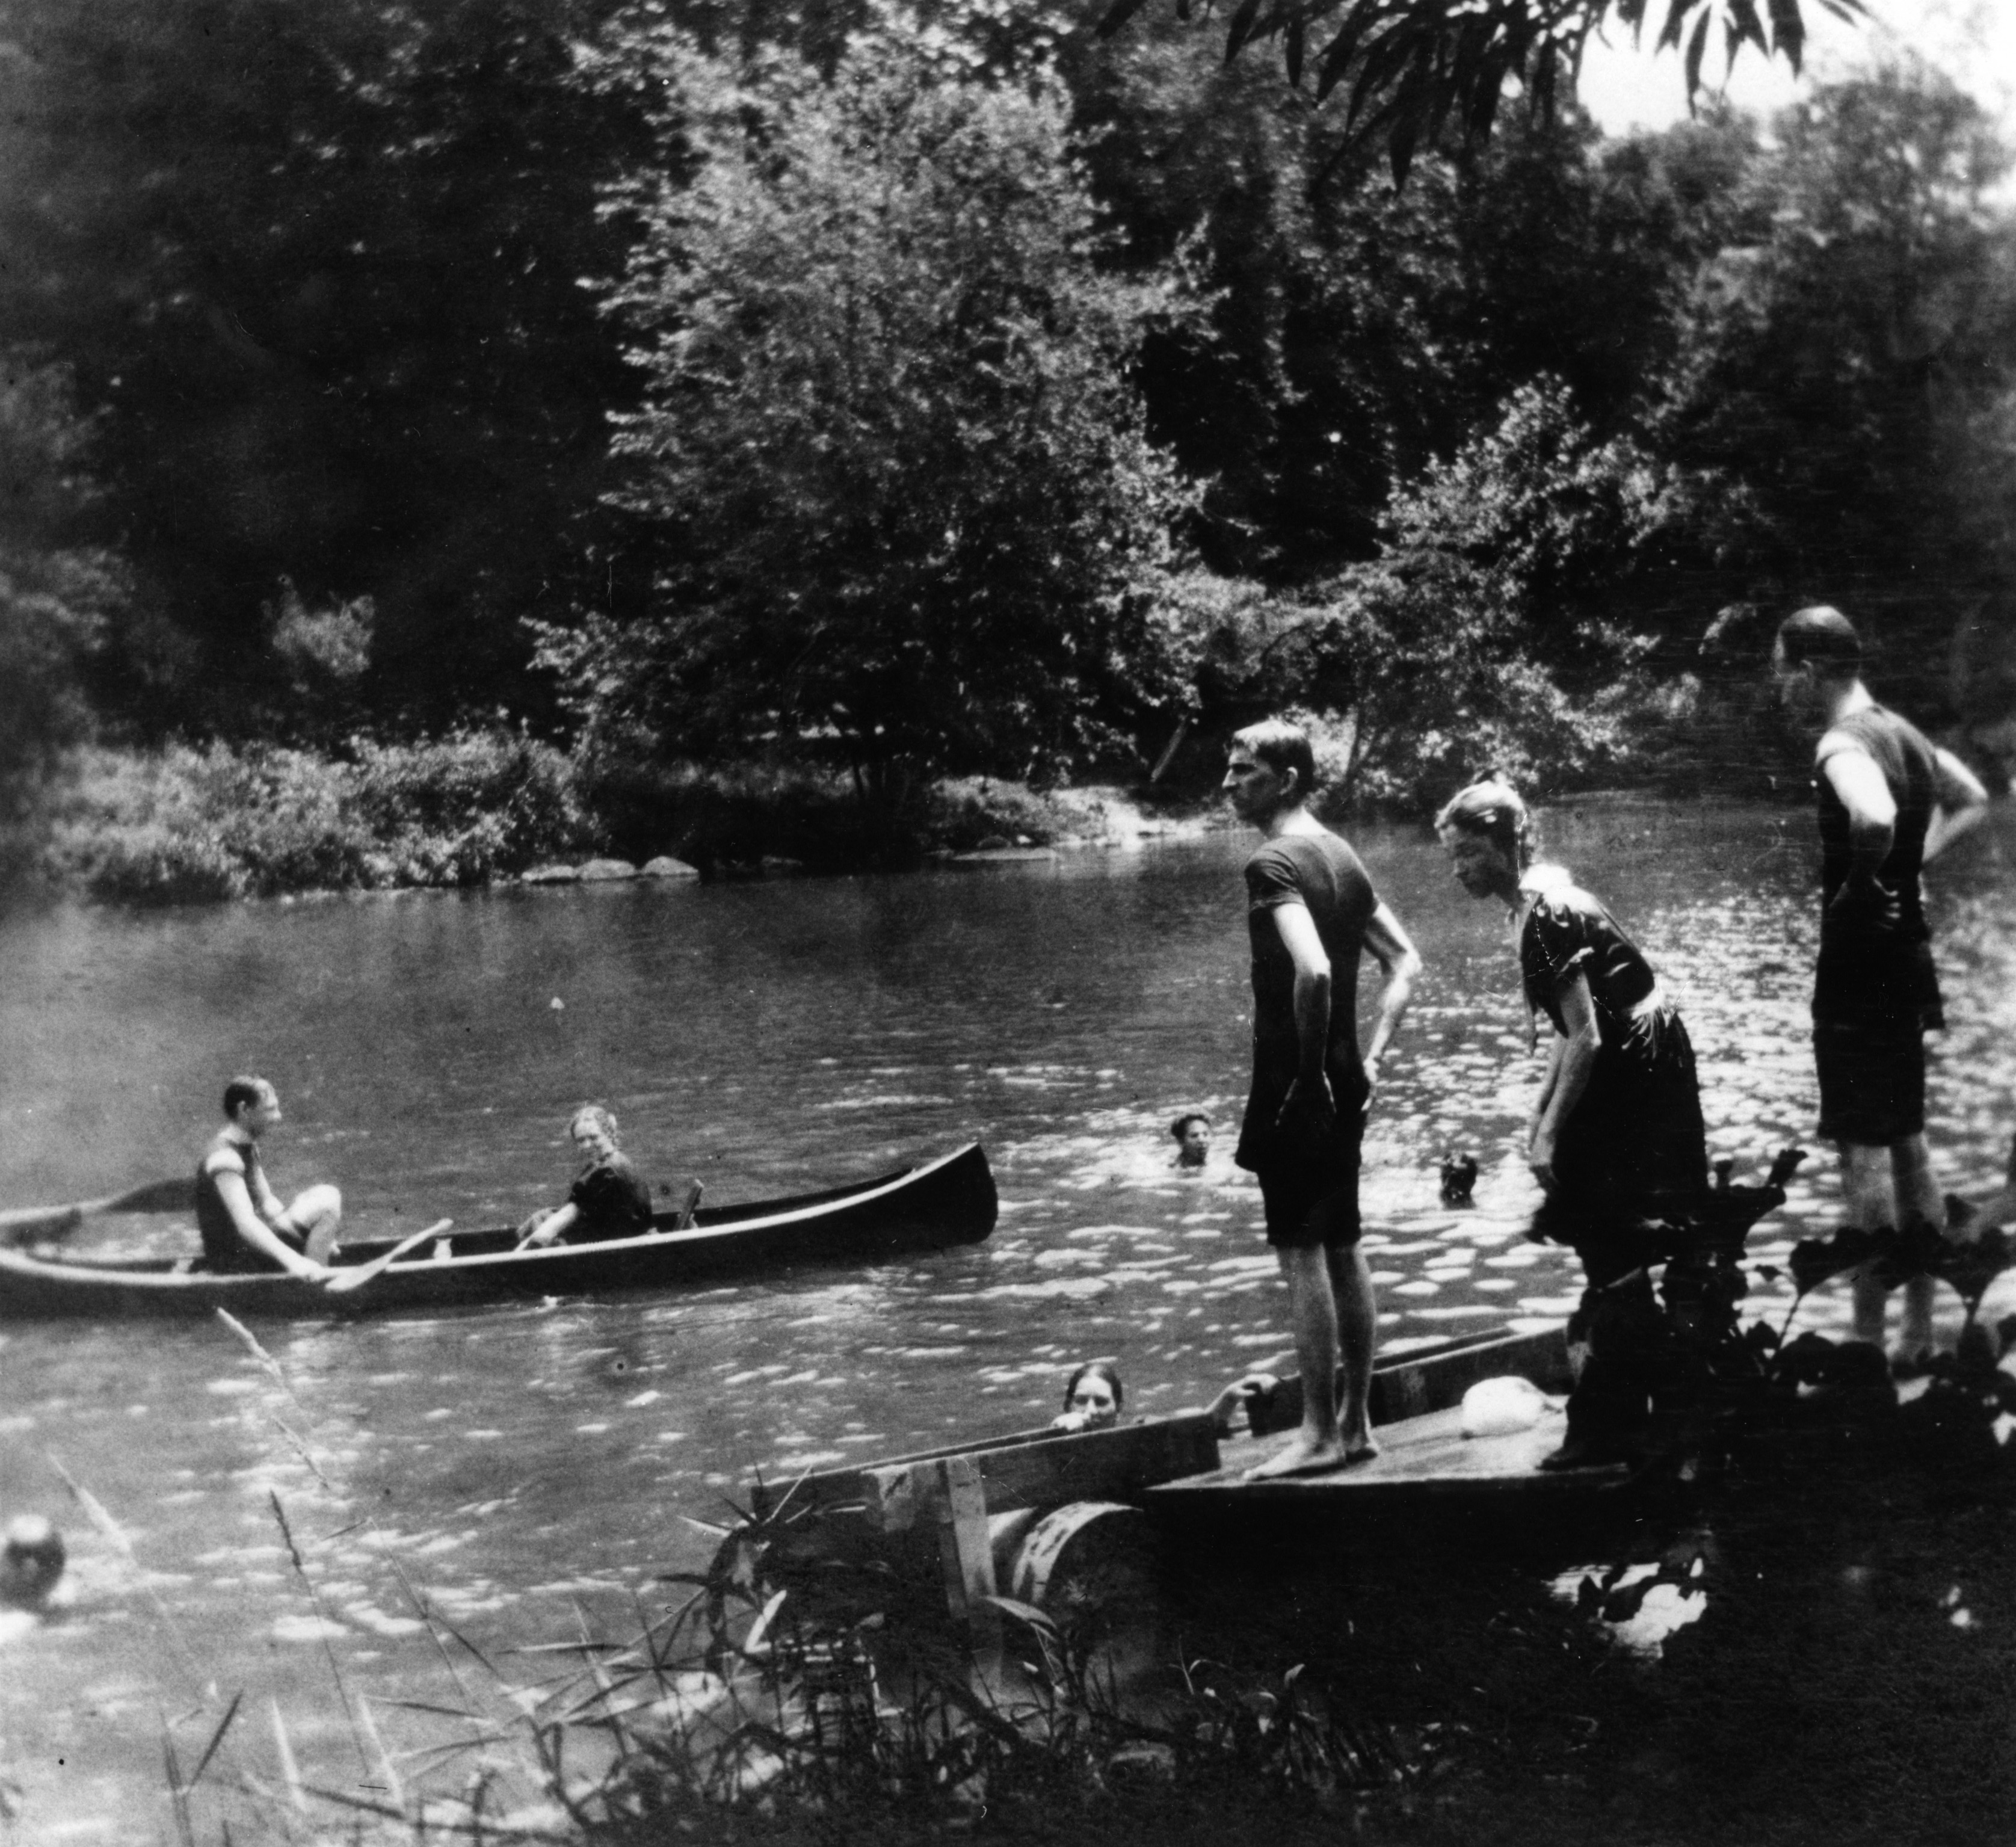 Black and white photograph of people canoeing and swimming in what is probably the Brandywine River.